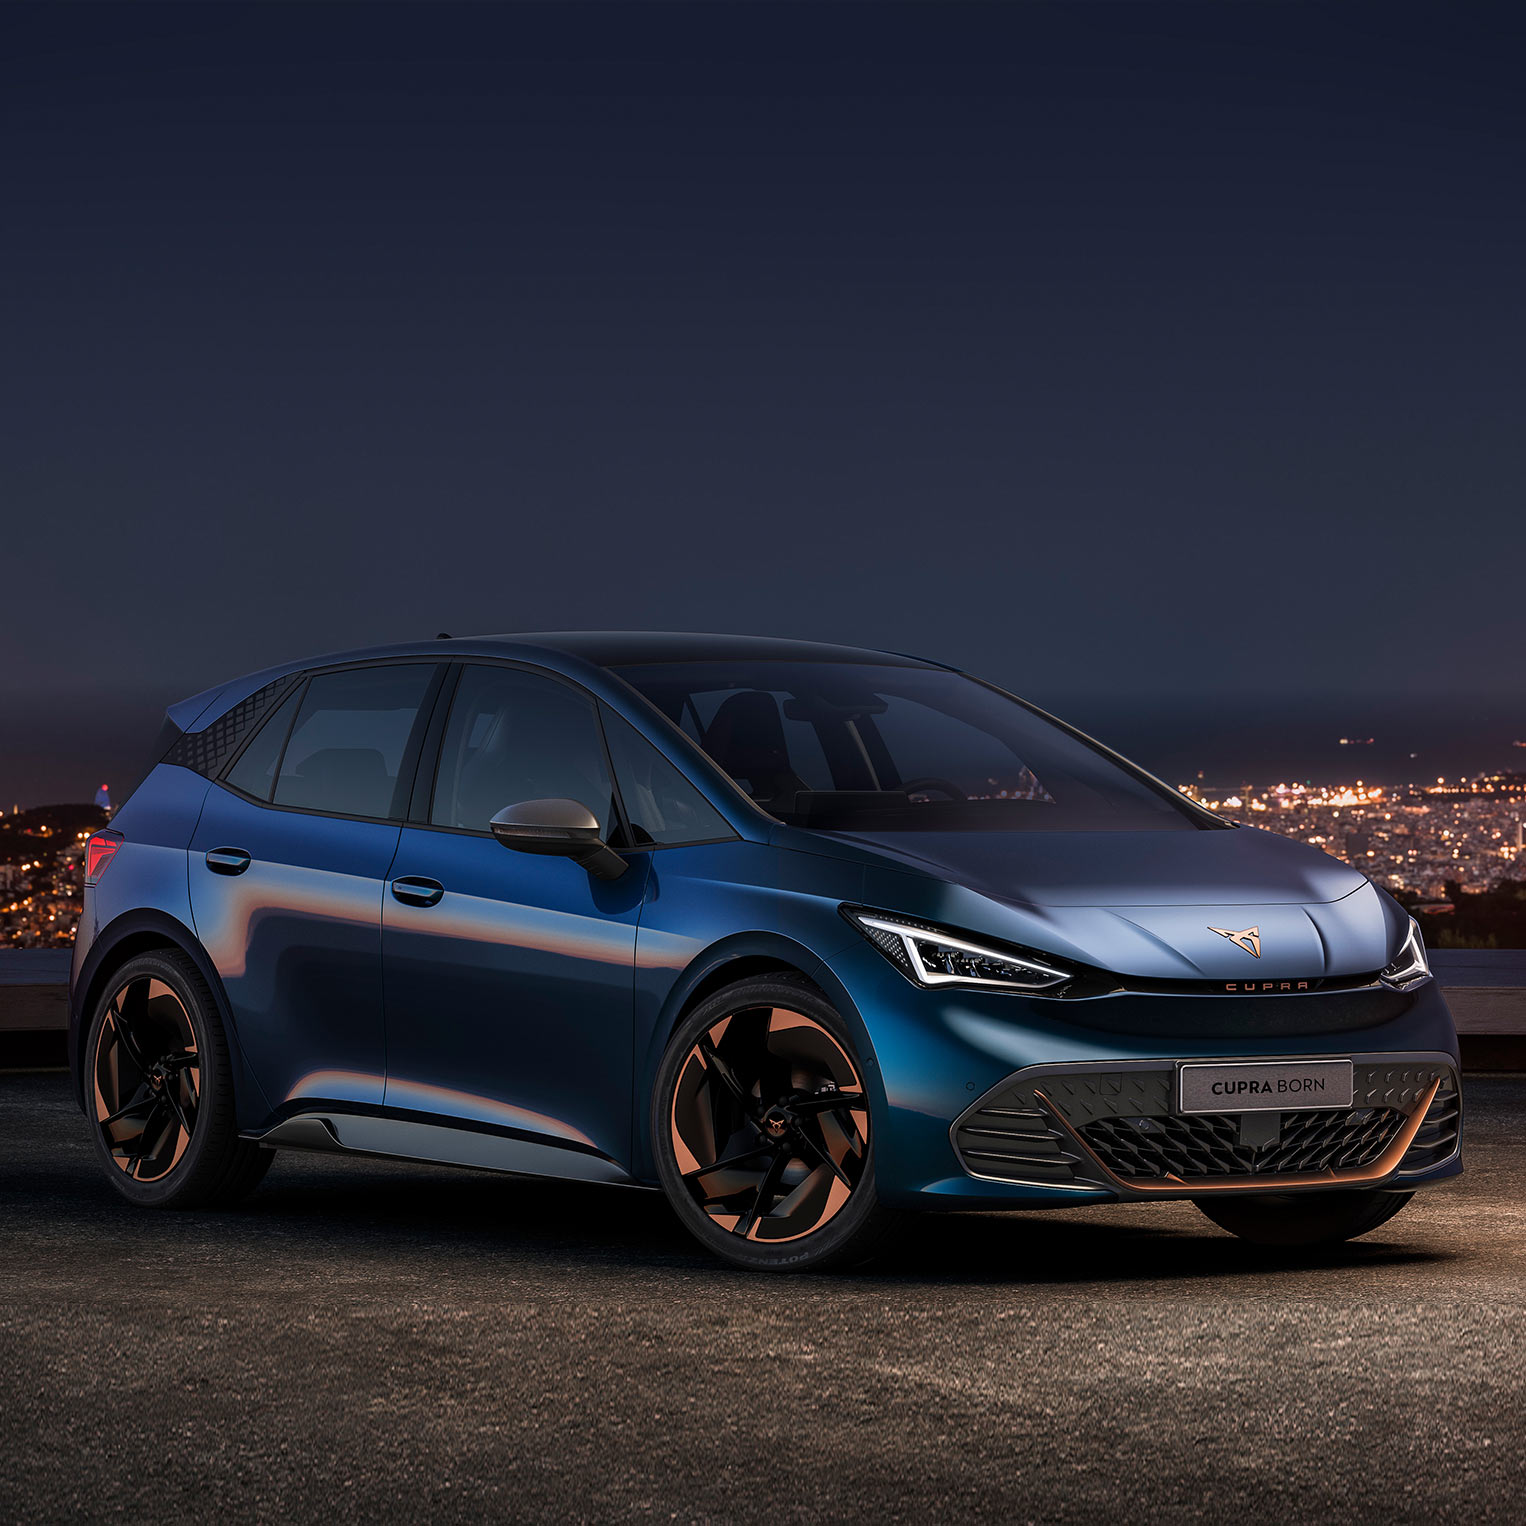 A close-up of a CUPRA Born against a city background at night